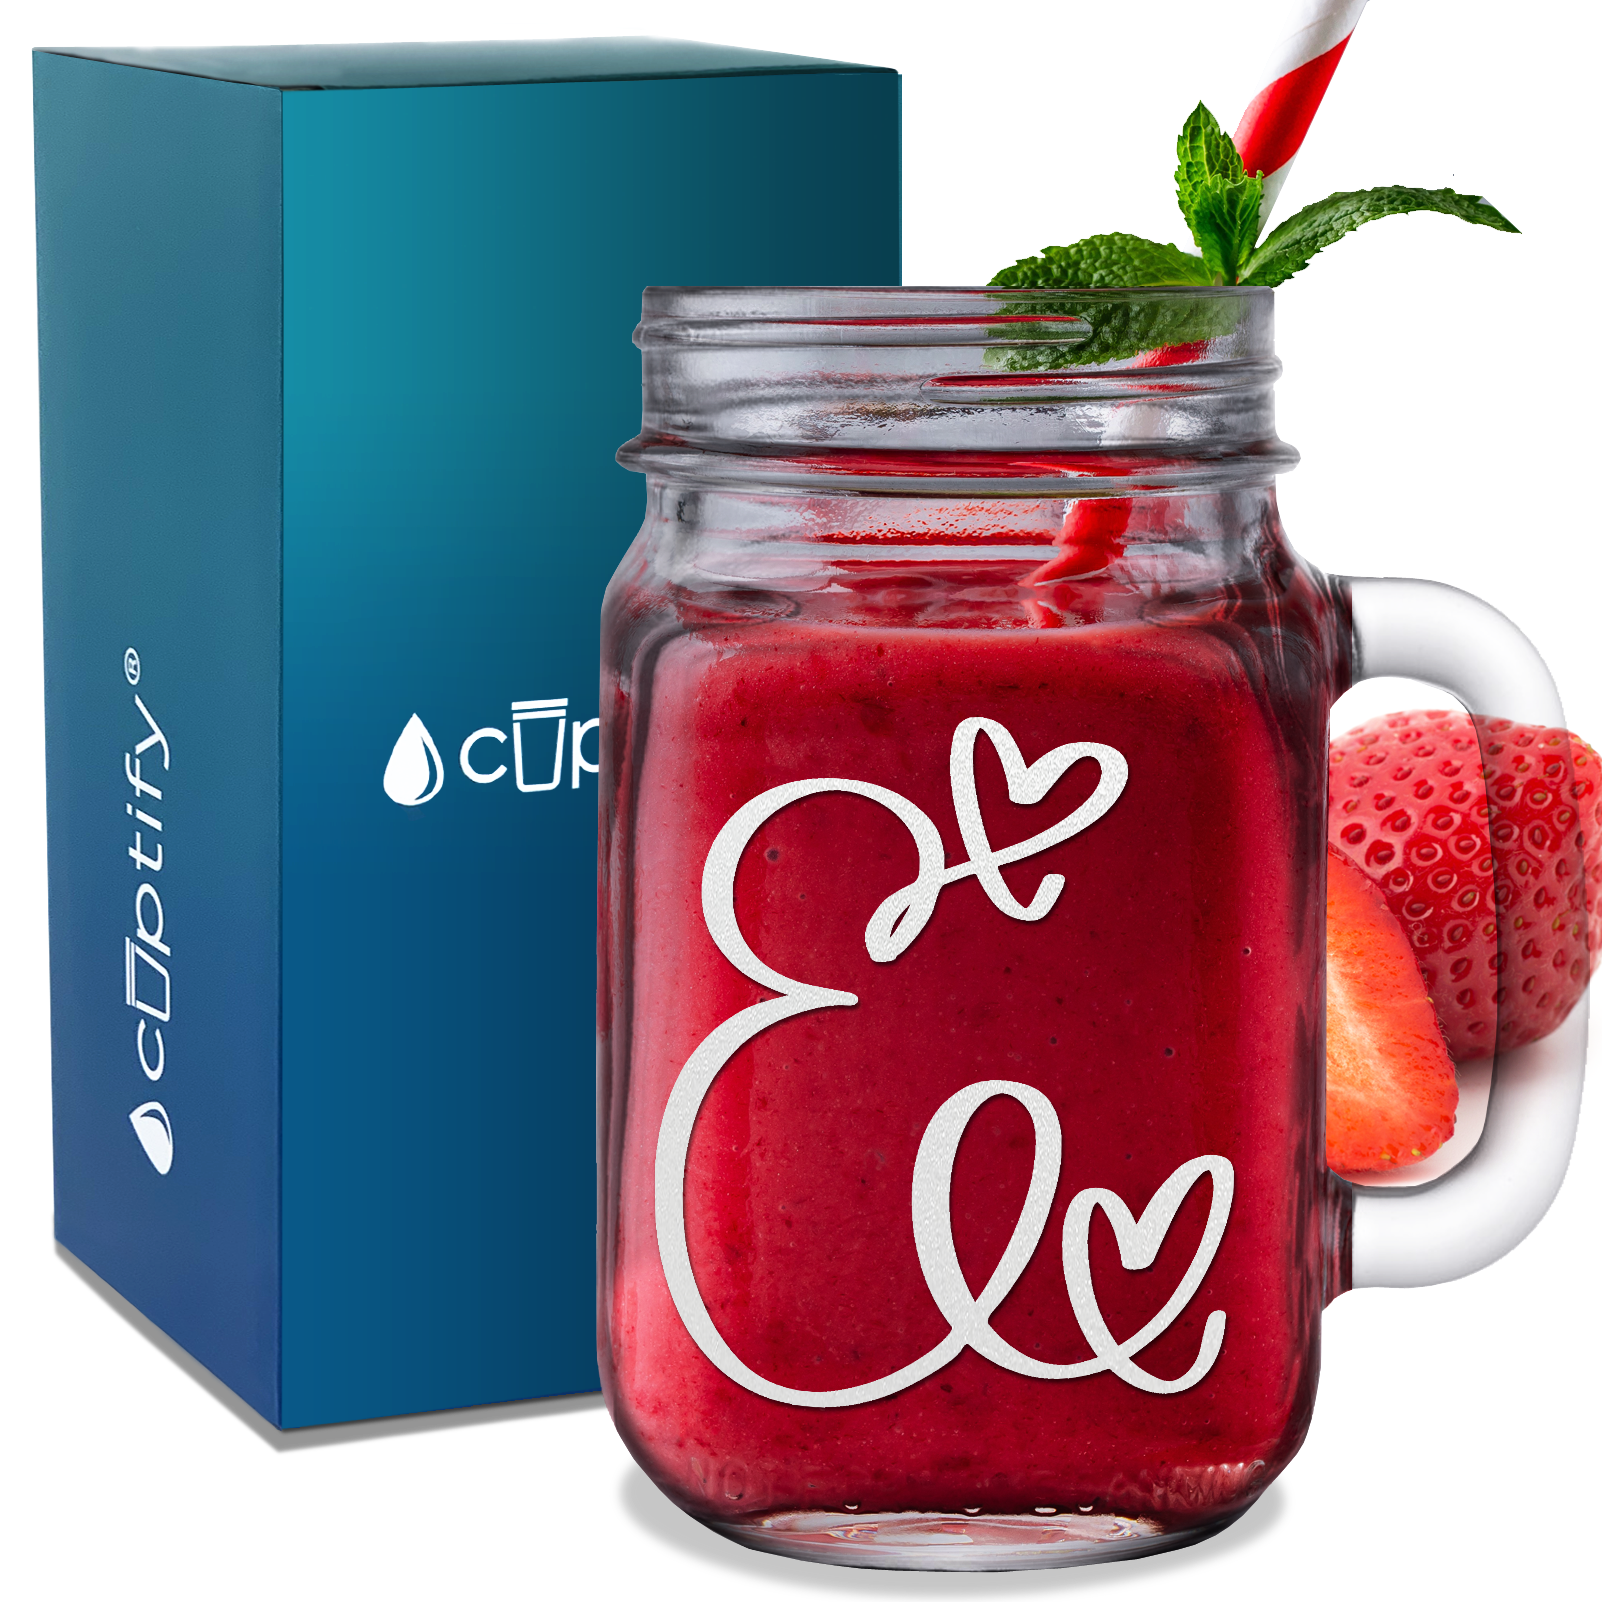  Monogram Hearts Initial Letter E Etched on 16 oz Mason Jar Glass